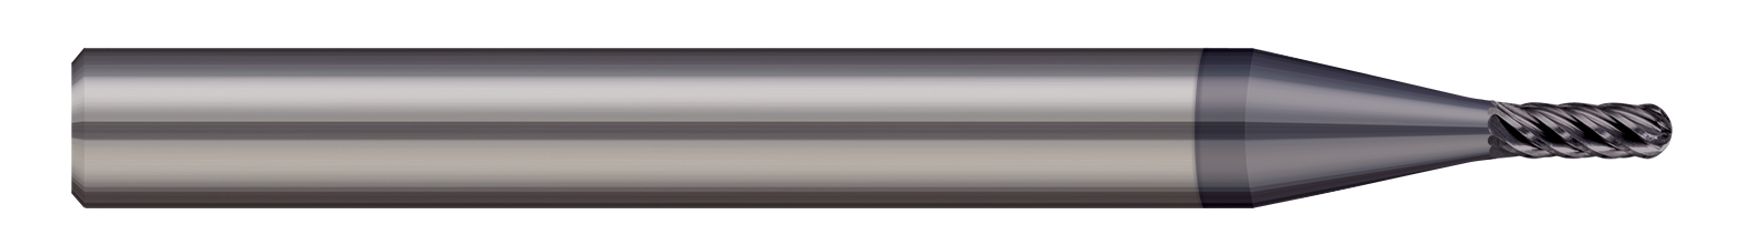 End Mills for Hardened Steels-Ball-For Steels Up to 55 Rc